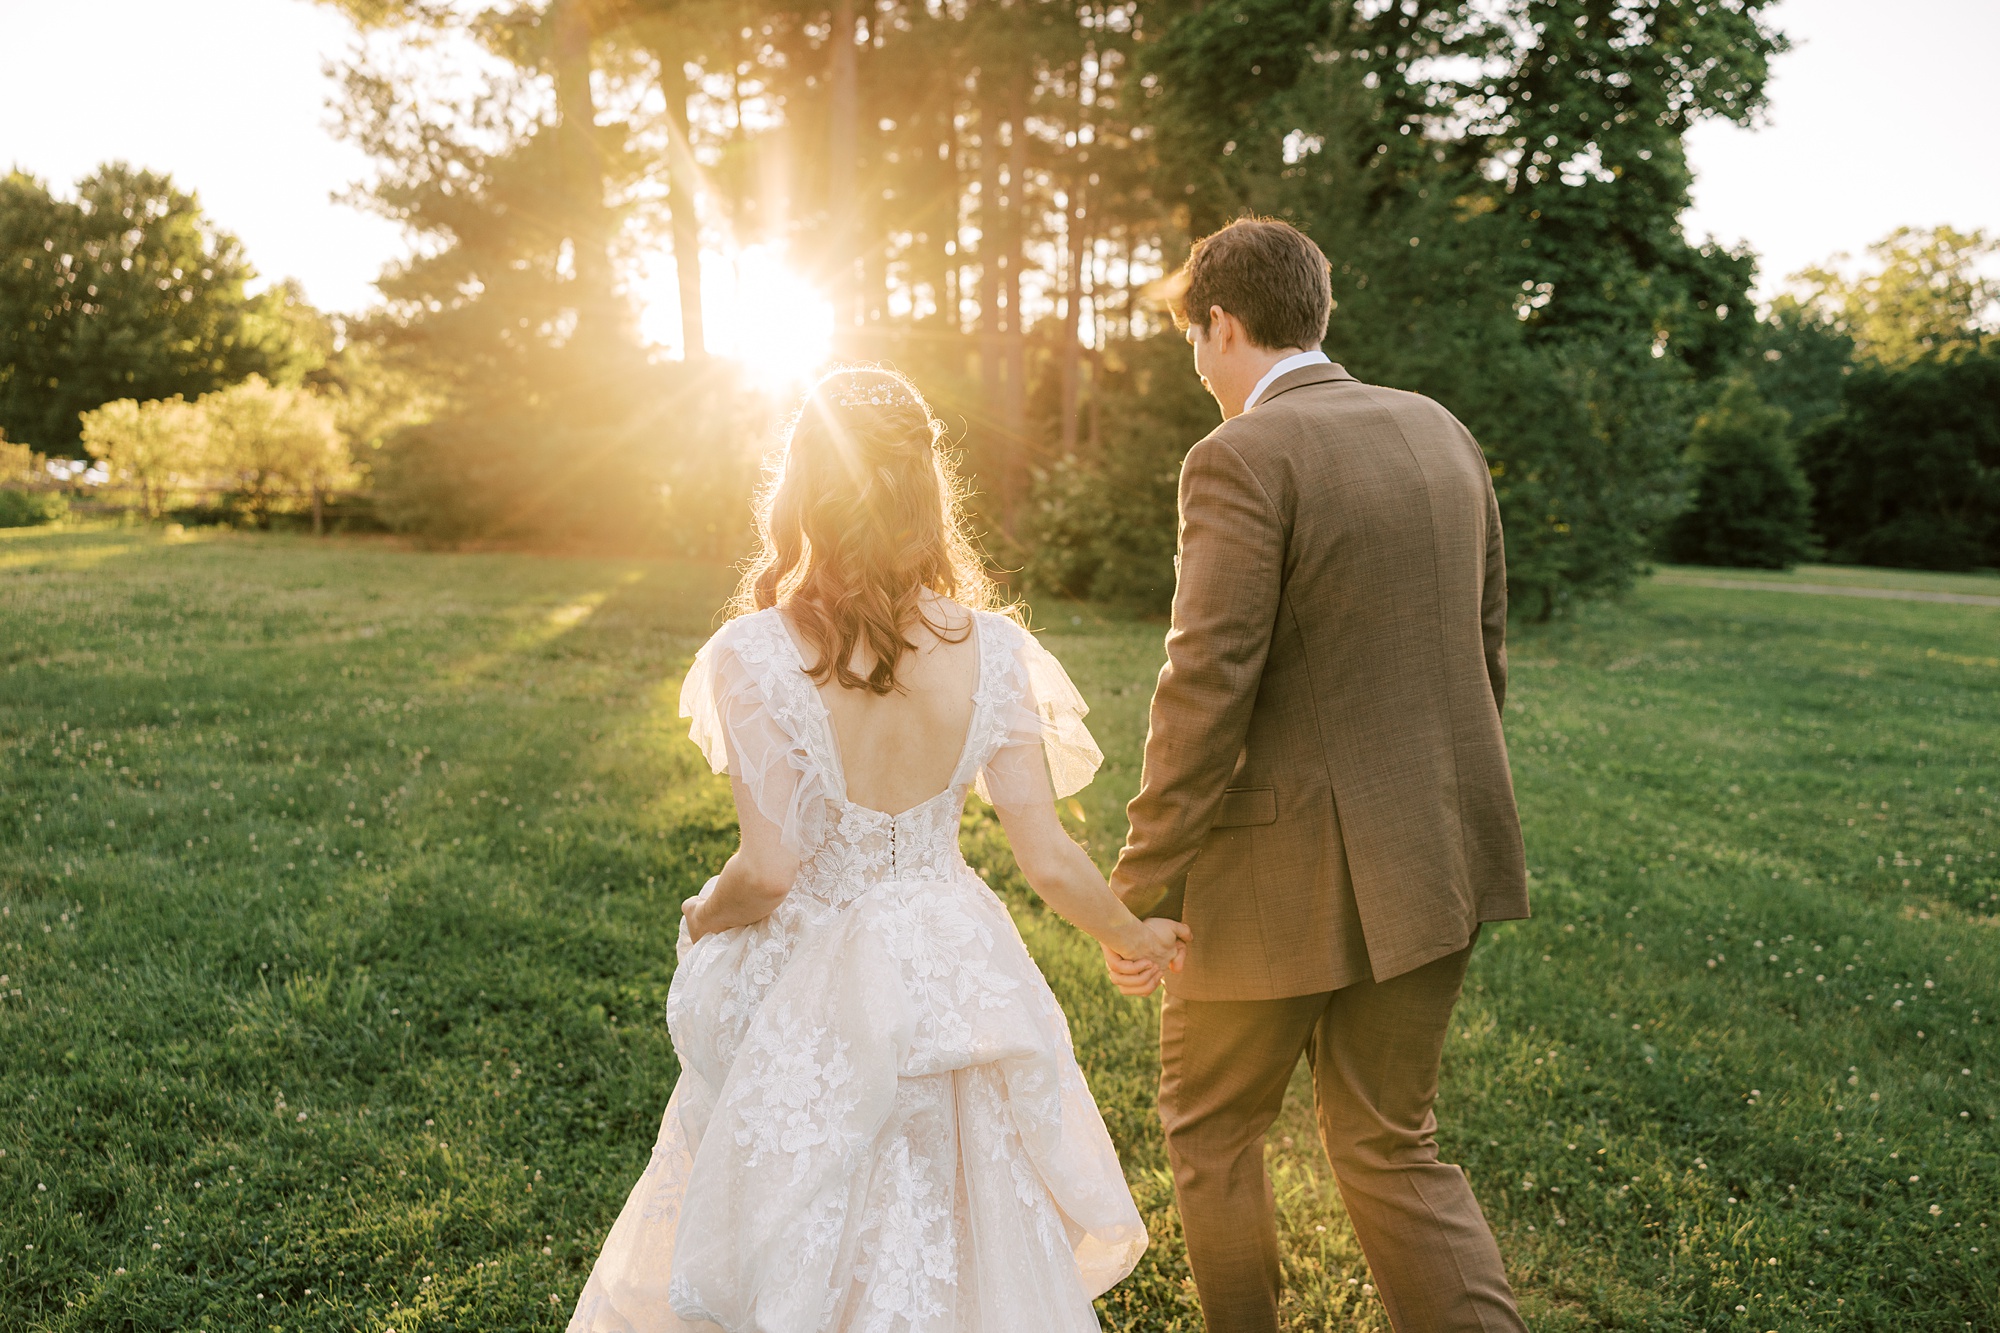 newlyweds hold hands walking through lawn at sunset 